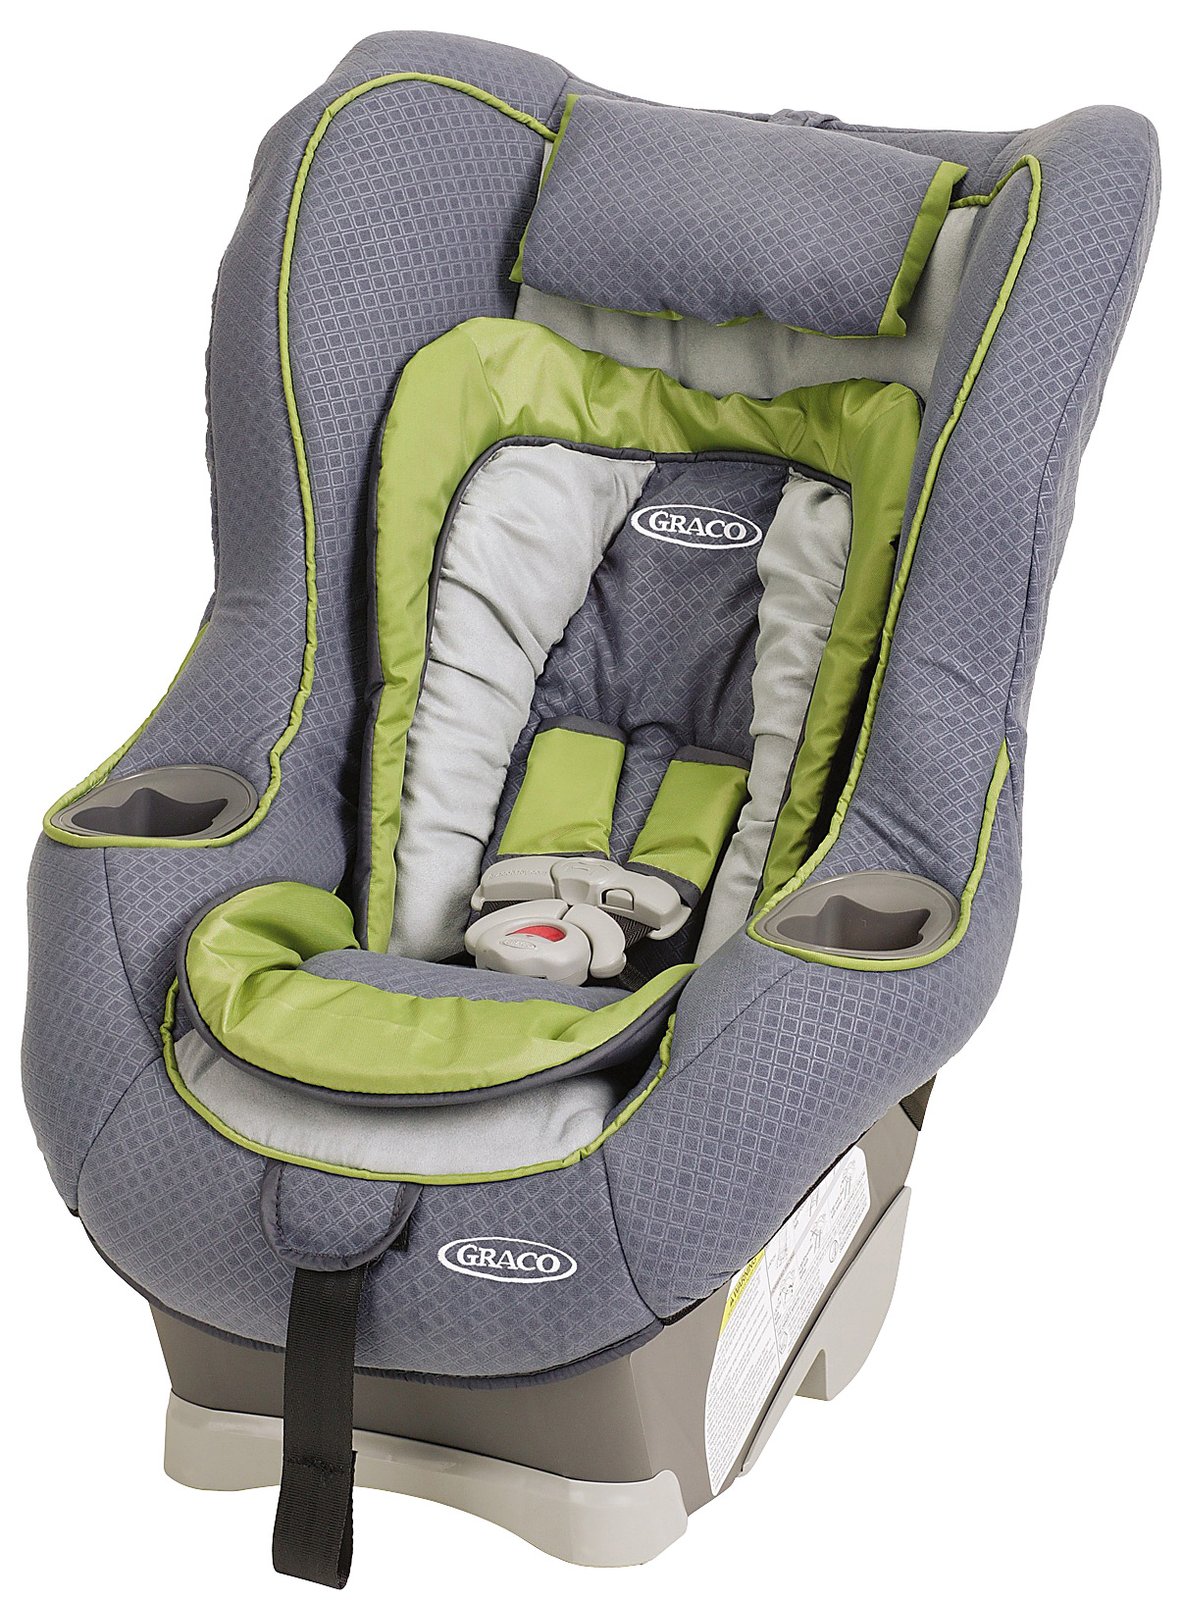 Graco recalls 1,393 'My Ride 65' car seats due to a defect with harness webbing. Thursday, May 25, 2017.